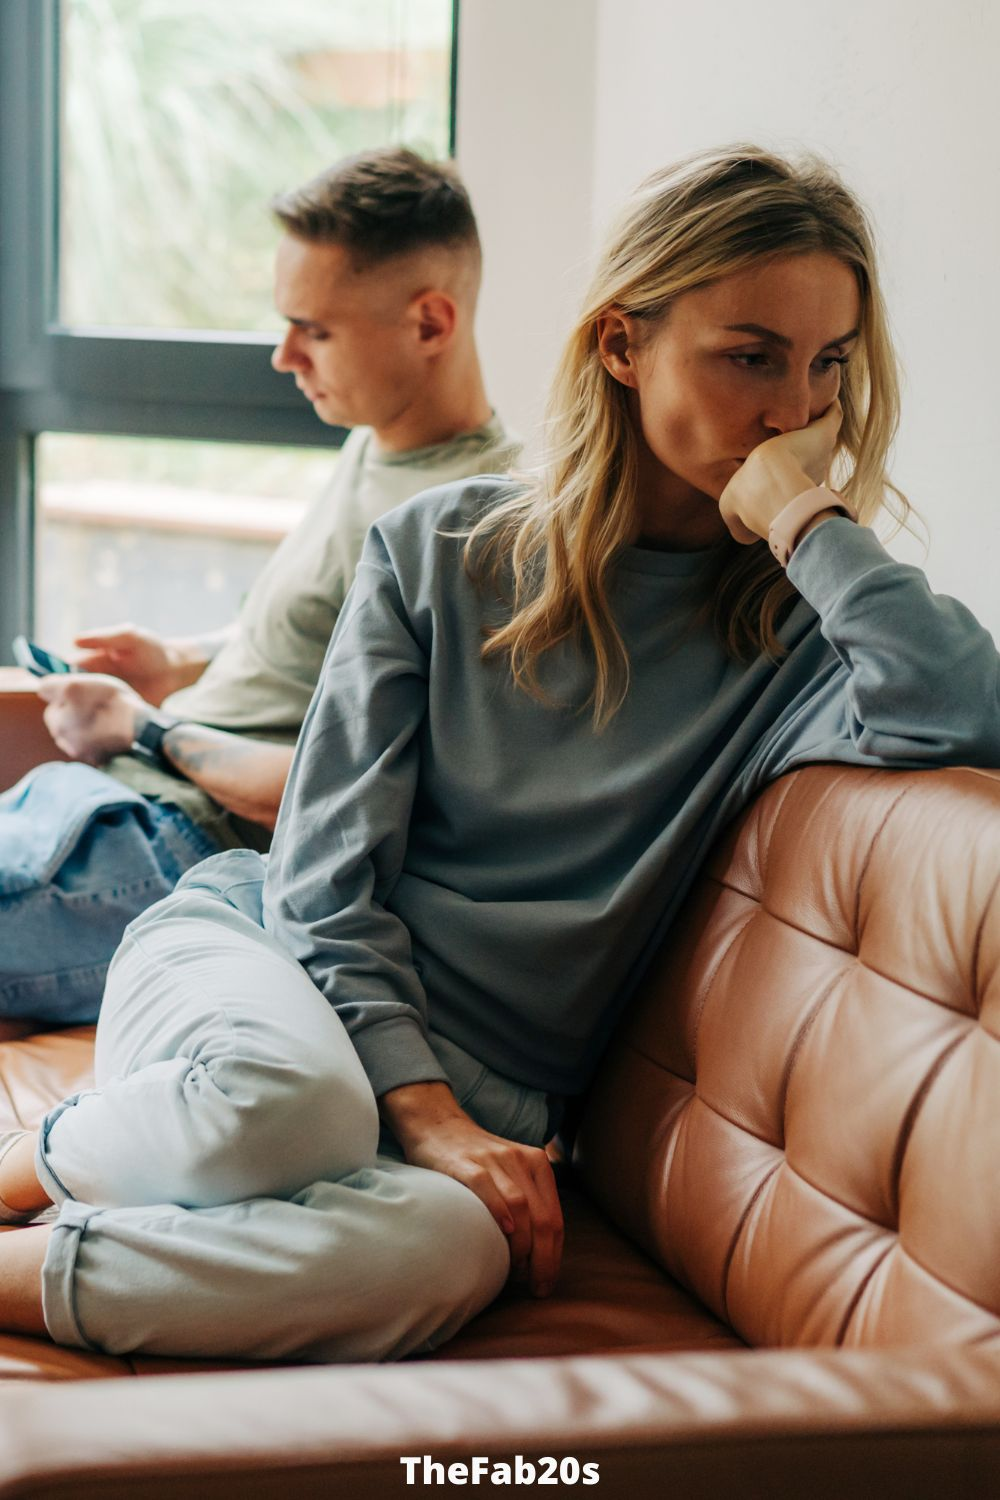 woman  thinking hard while boyfriend ignores her - Featured In How To Stop Overthinking In A Relationship 